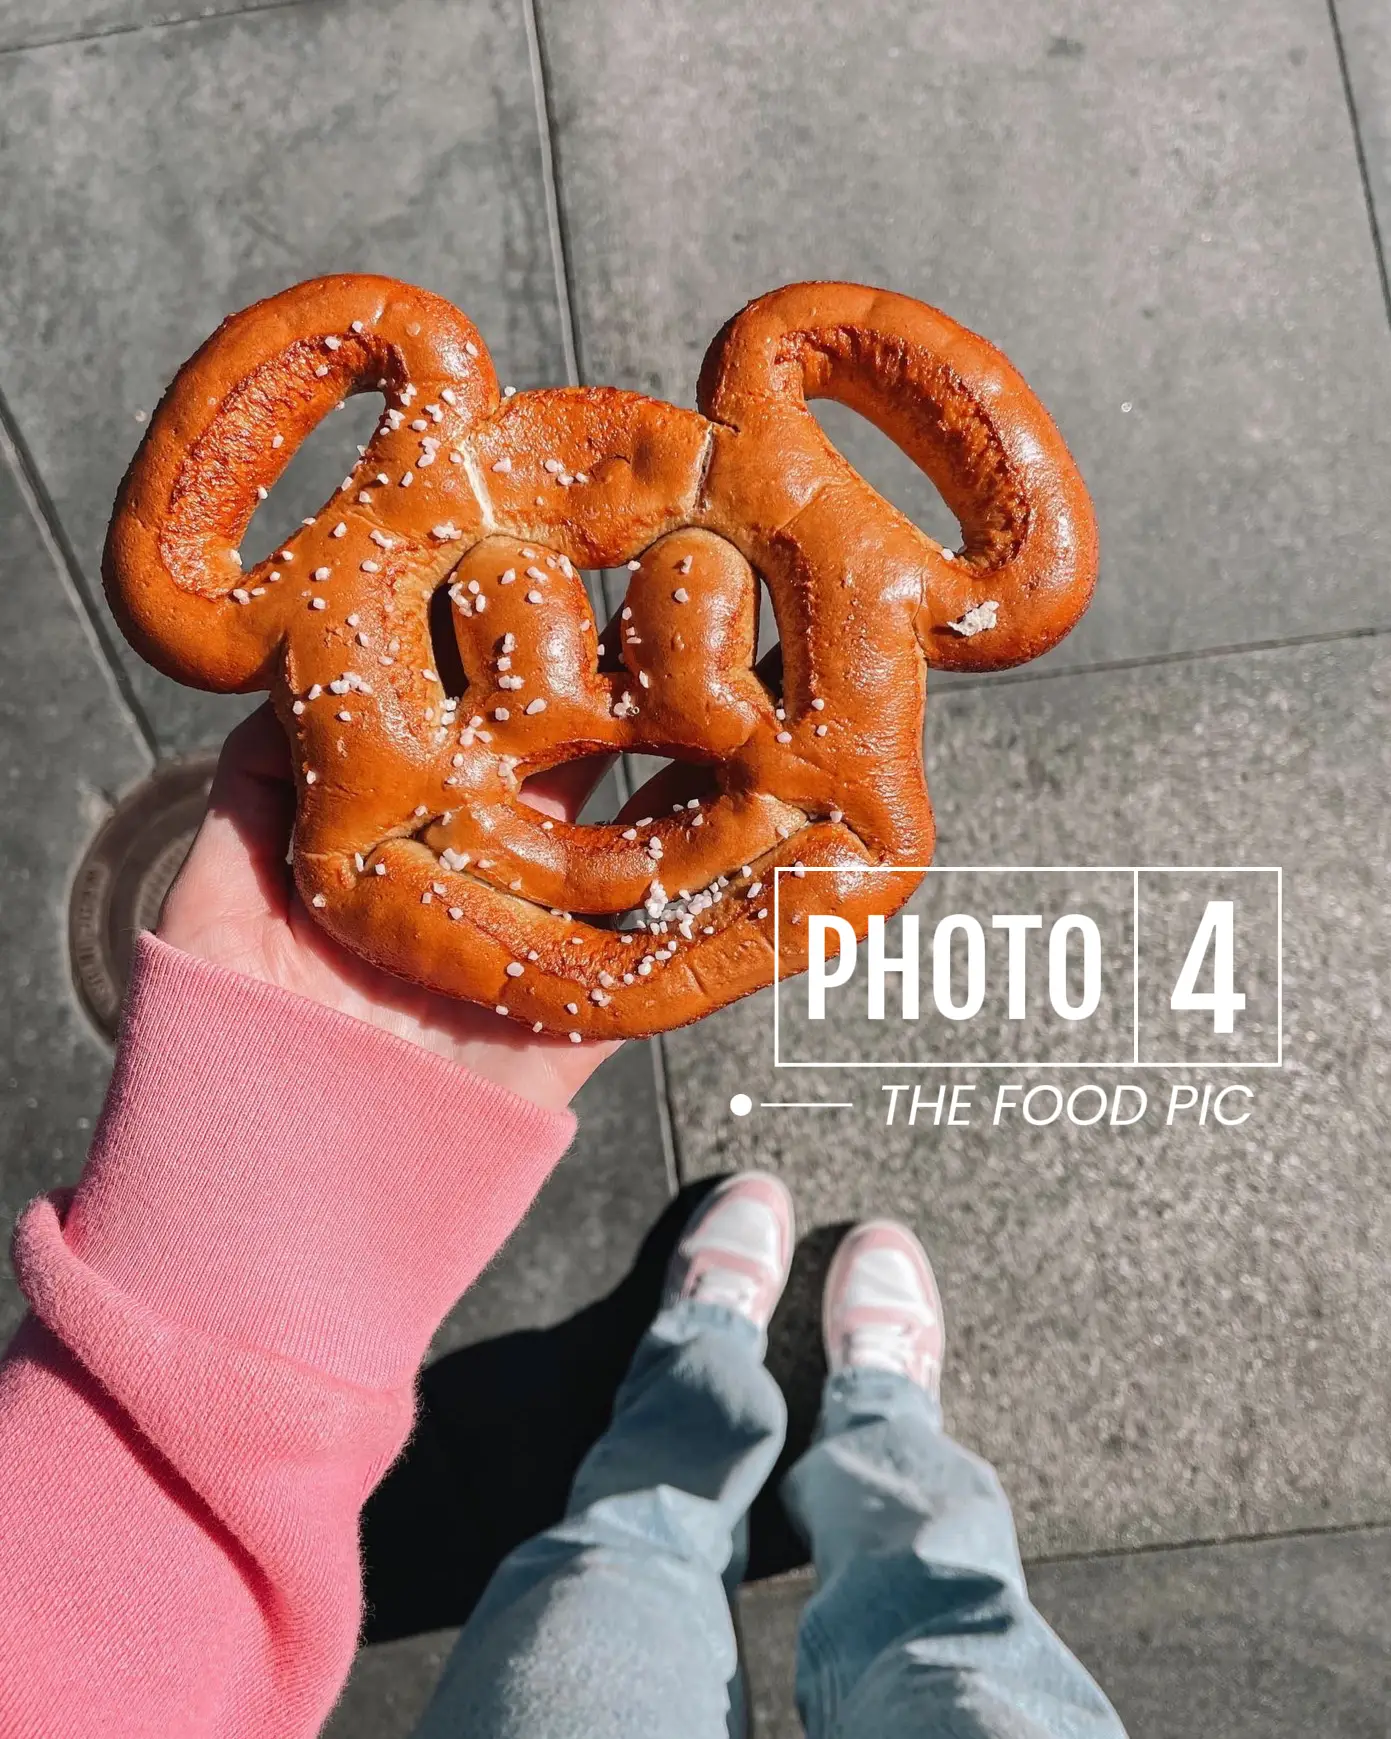  A person is holding a pretzel shaped like Mickey Mouse.